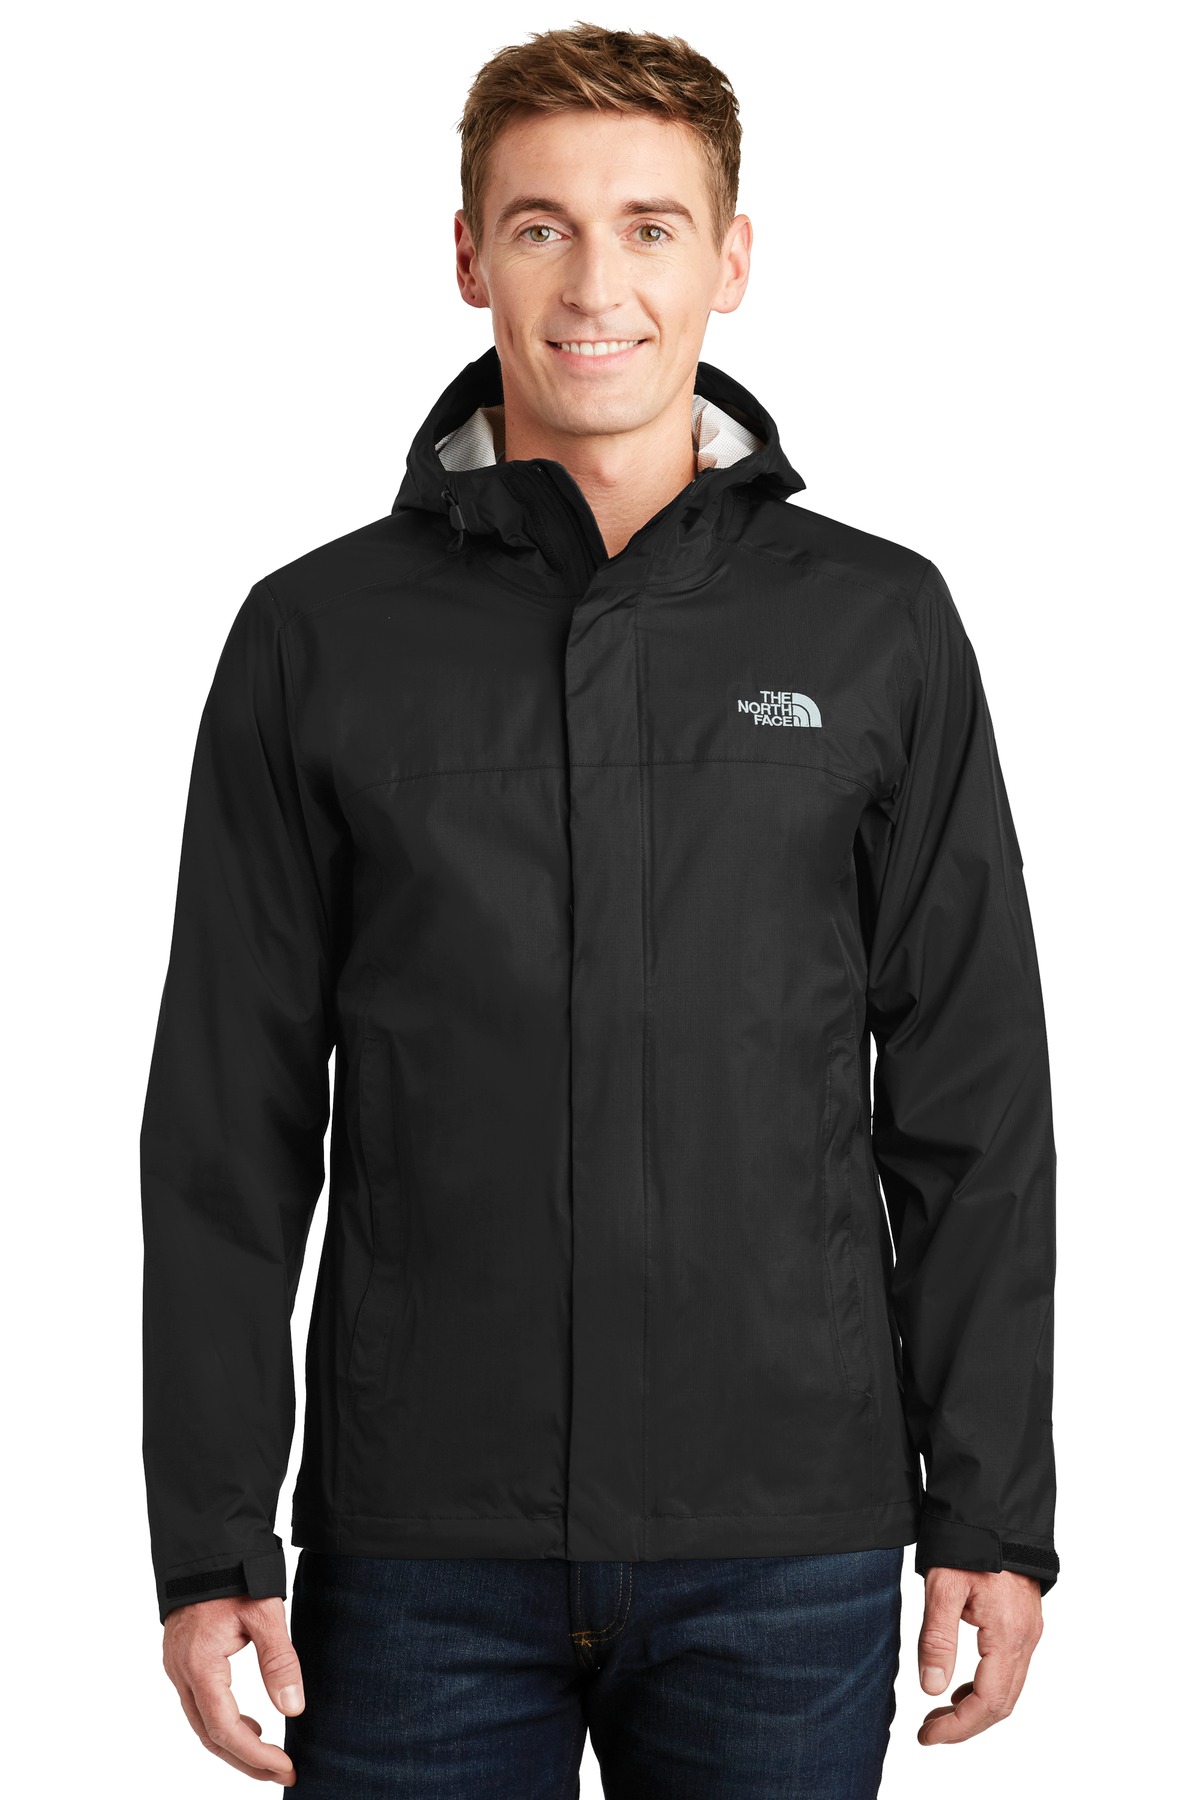 north face jacket price